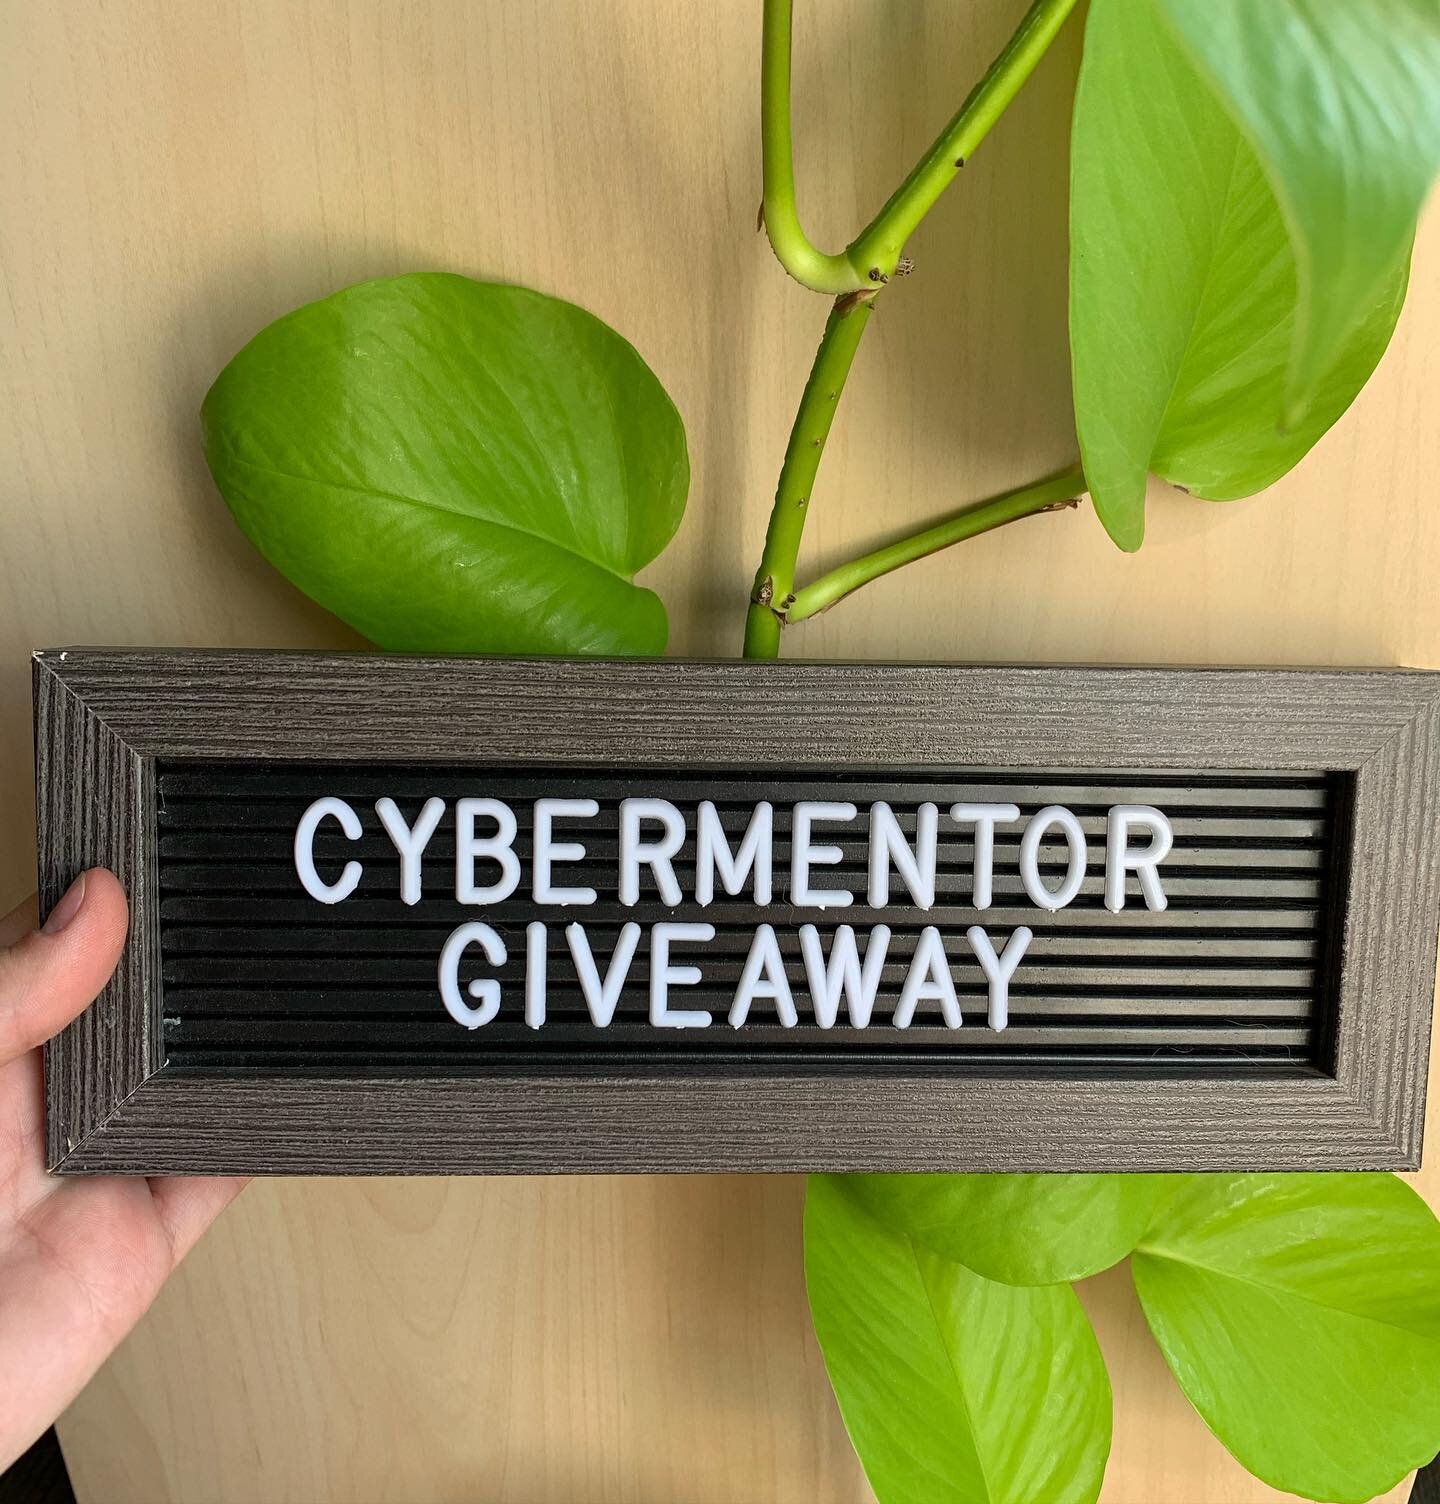 CYBERMENTOR GIVEAWAY. Swipe through to see the prize - a hand crocheted red blood cell made by team member @hollistonandfriends. 
&bull;
We had so much fun with our last giveaway that we have decided to host another one! One lucky winner will be mail